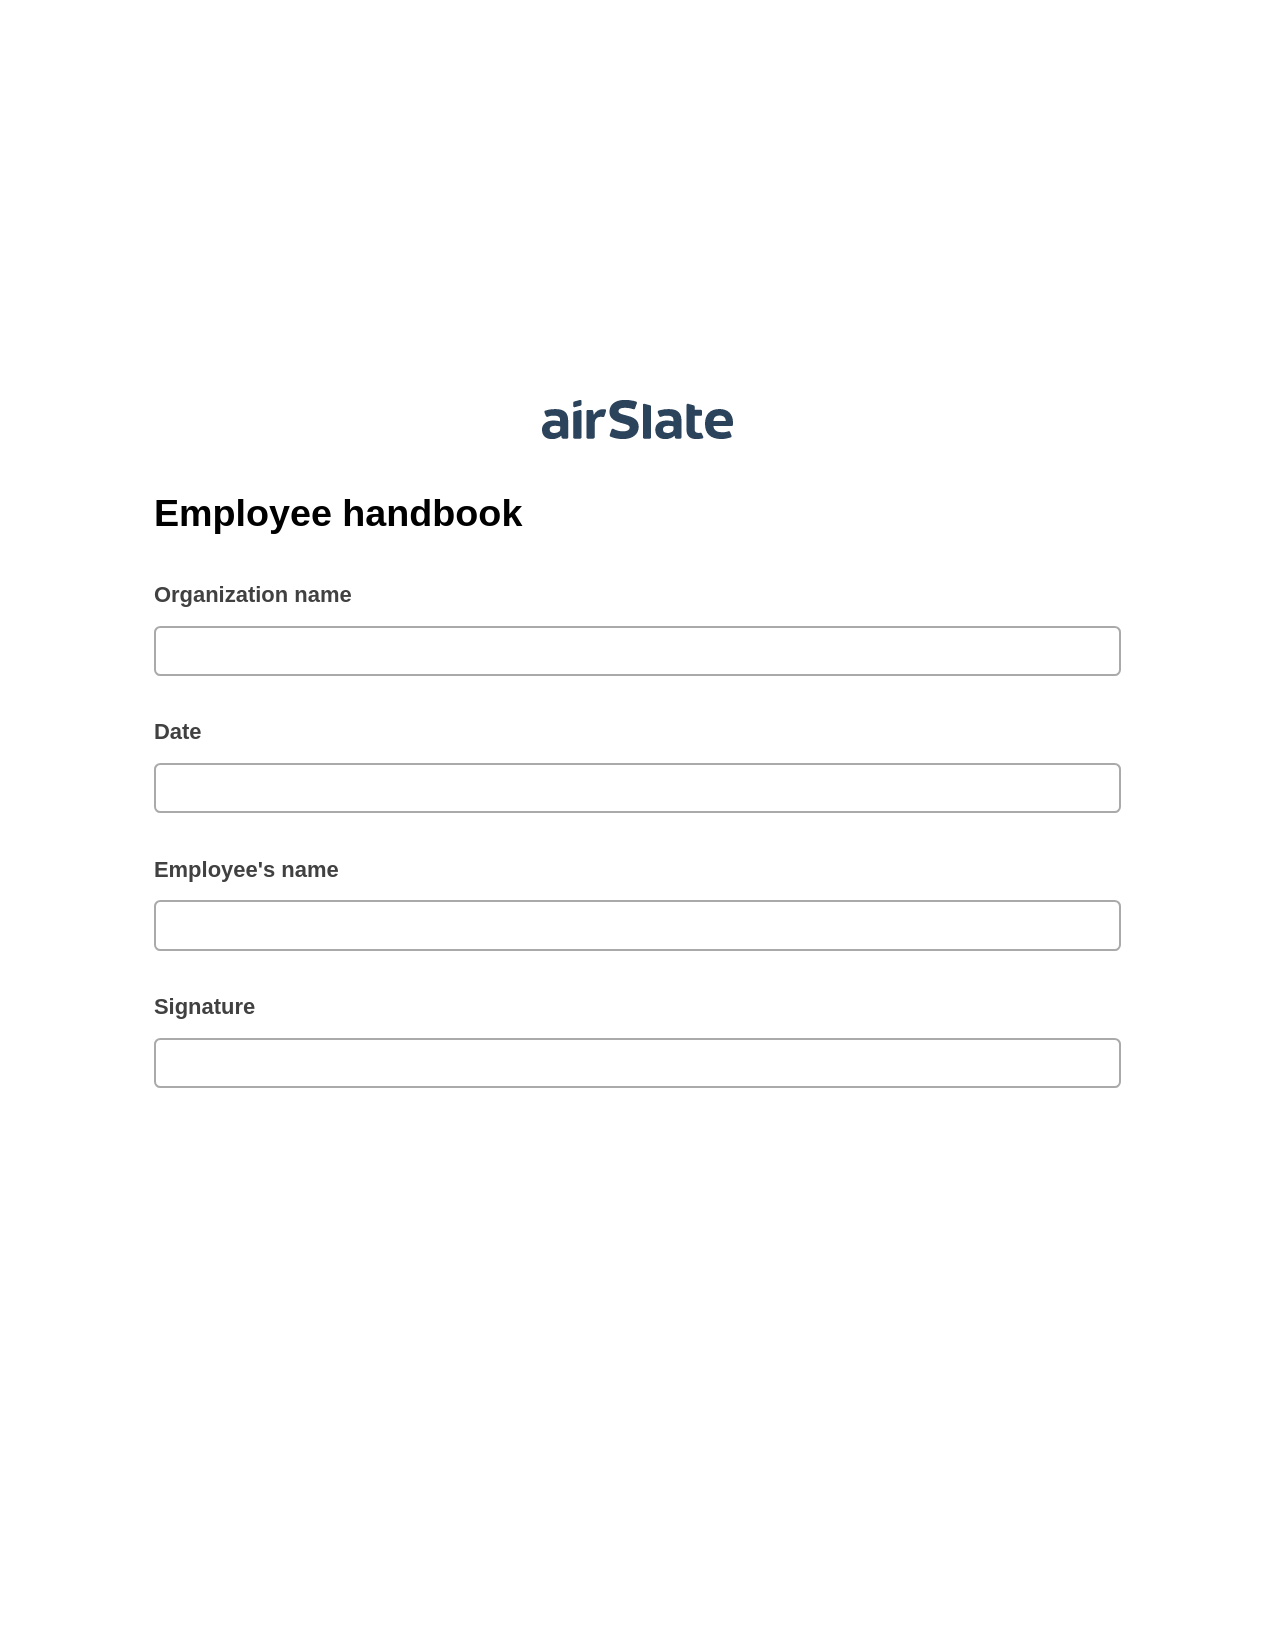 Employee handbook Pre-fill from Salesforce Record Bot, Send Mailchimp Campaign Bot, Email Notification Postfinish Bot